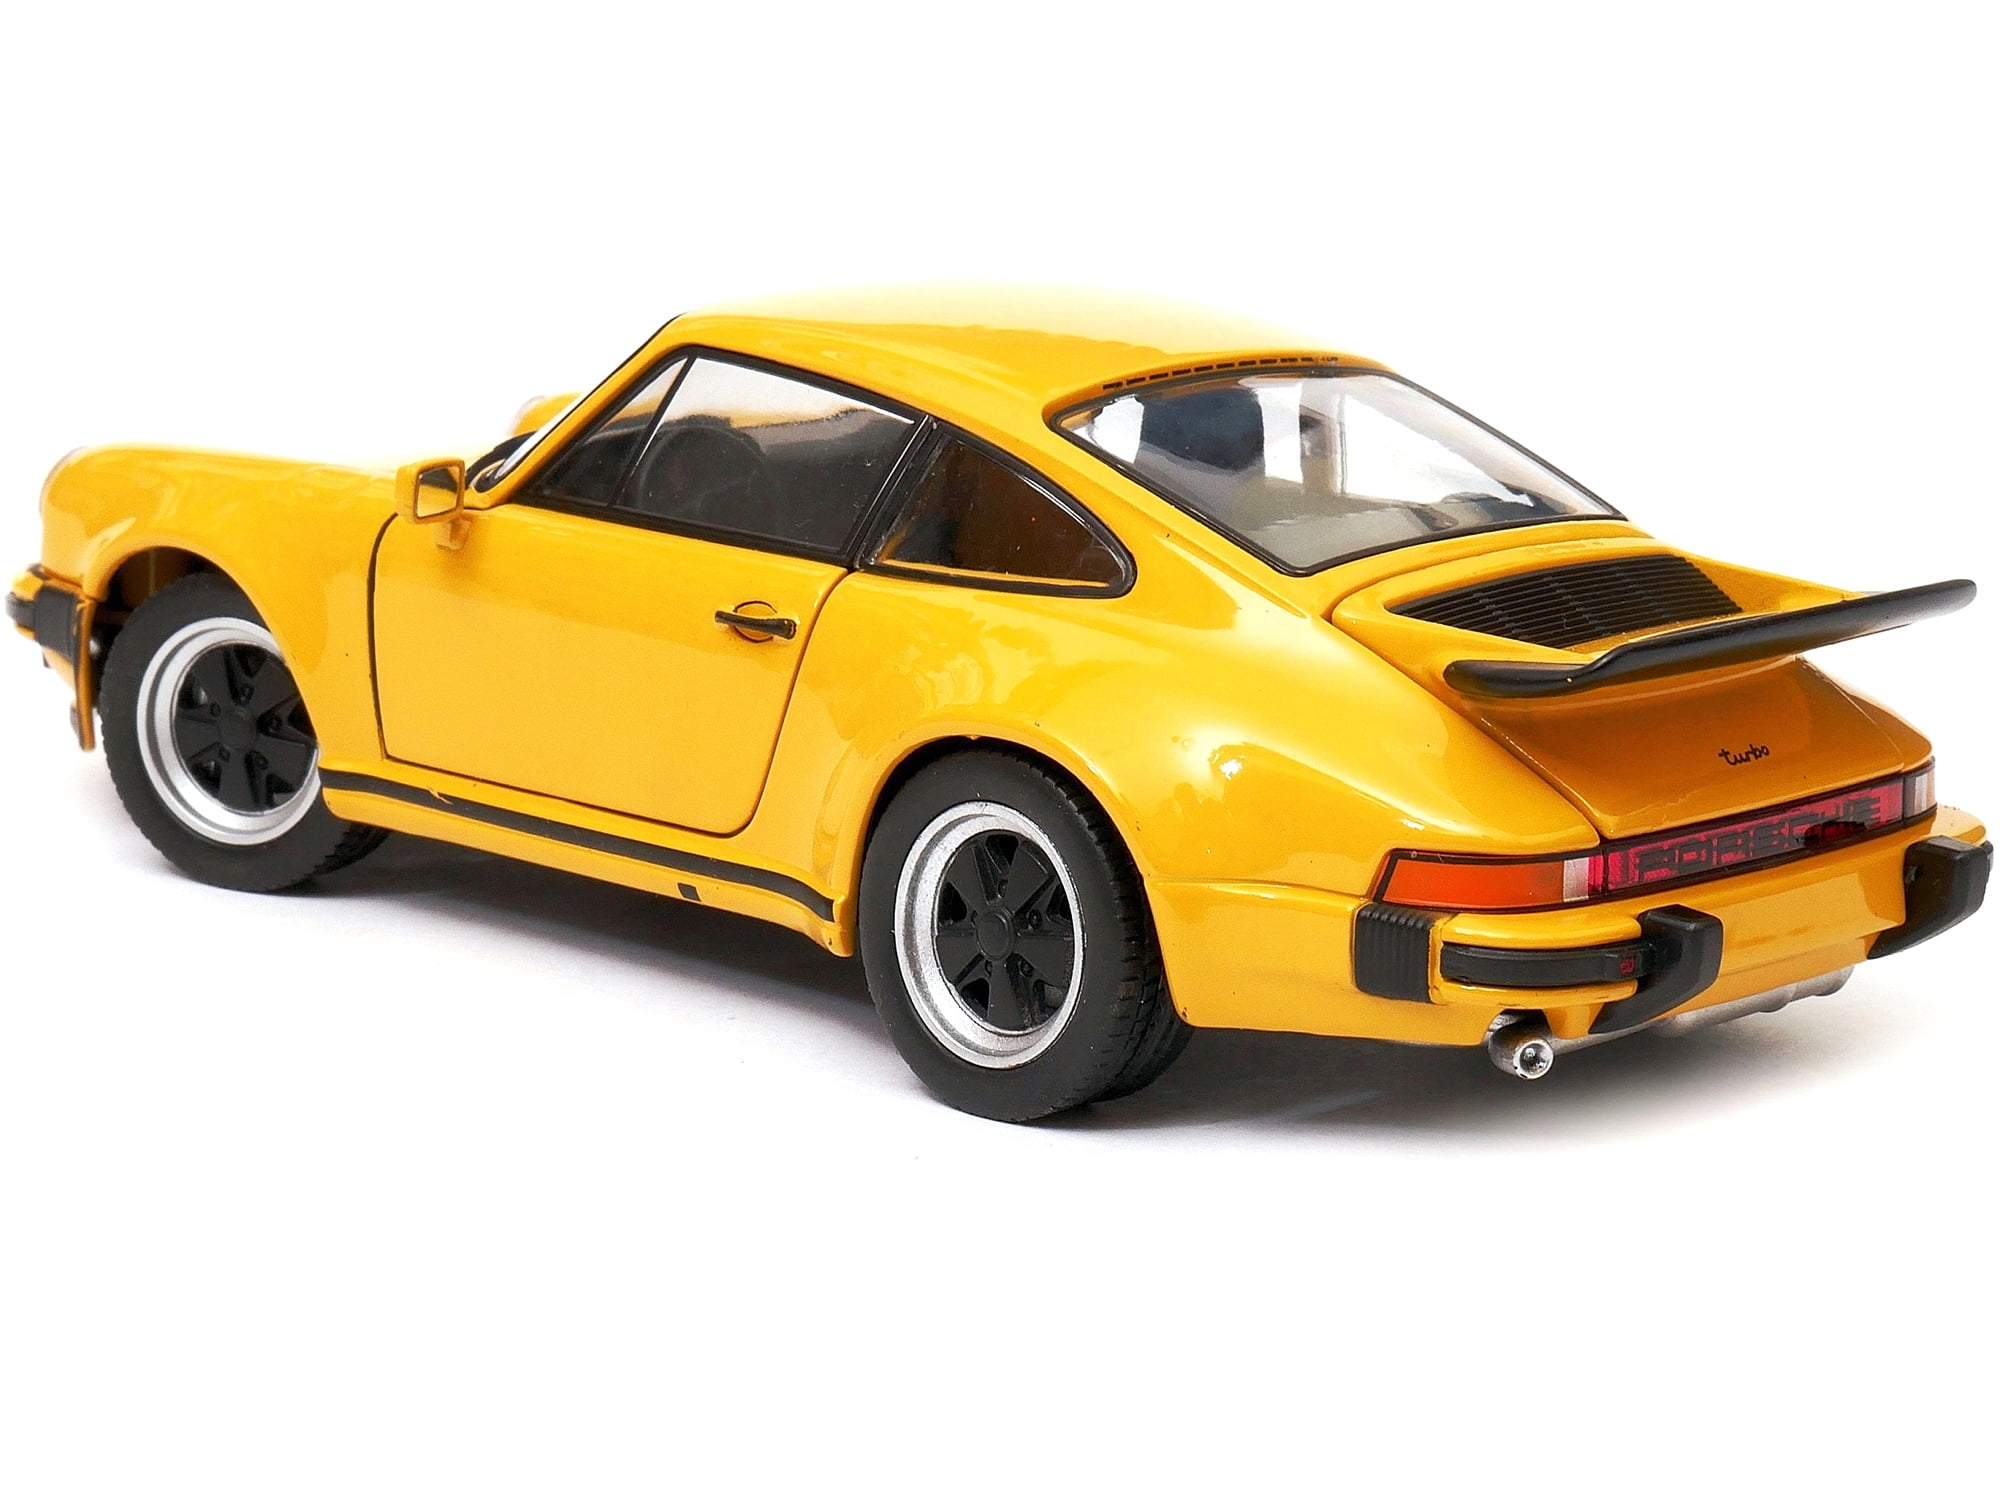 Porsche 911 Turbo 3.0 1974 1/24 Model Car Diecast Vehicle Toy Collection White 